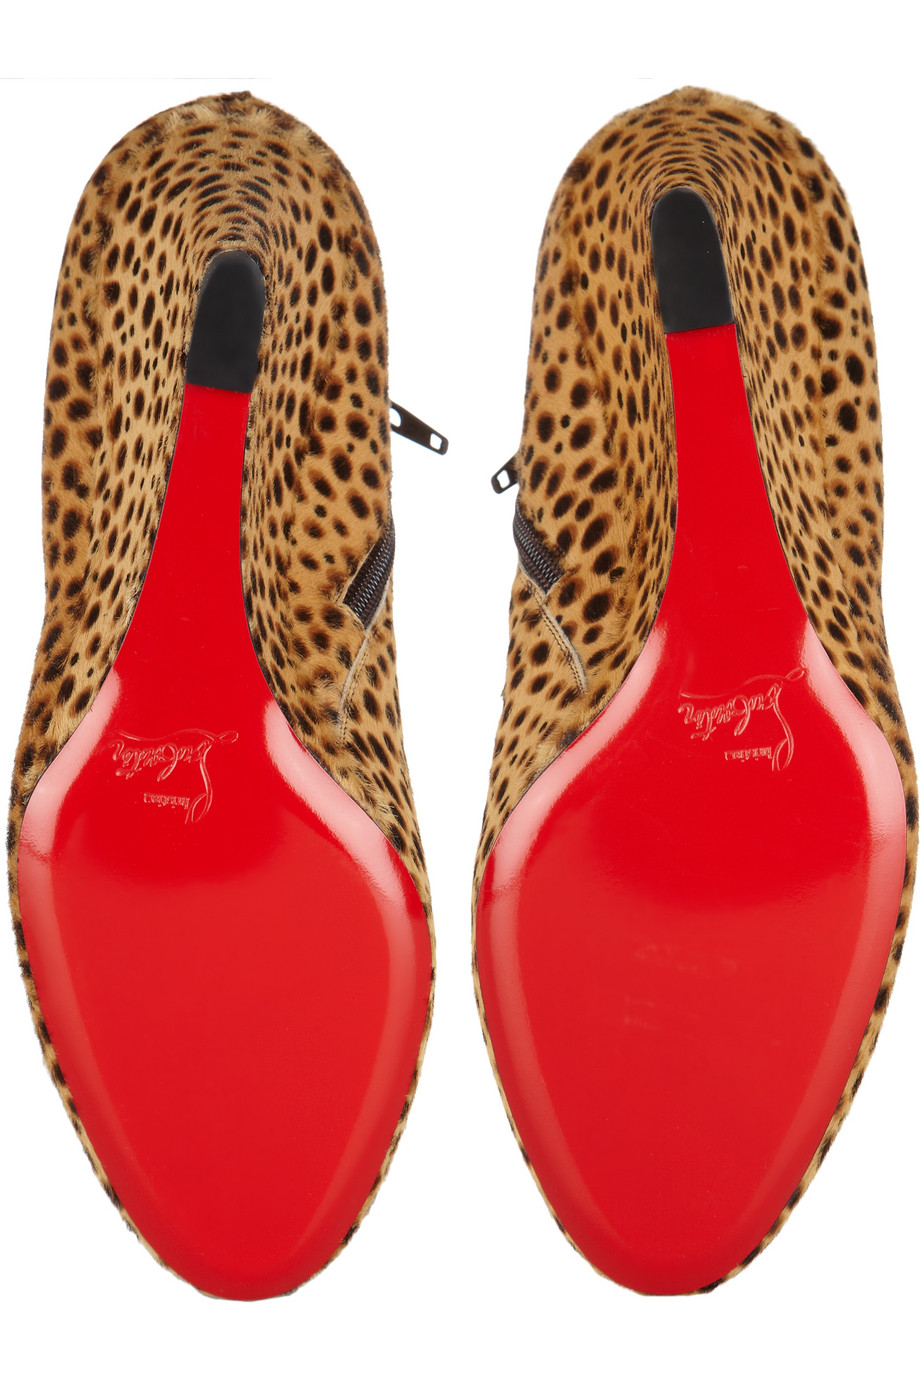 is the christian louboutin website fake - Christian louboutin Belle Zeppa 85 Printed Calf Hair Ankle Boots ...